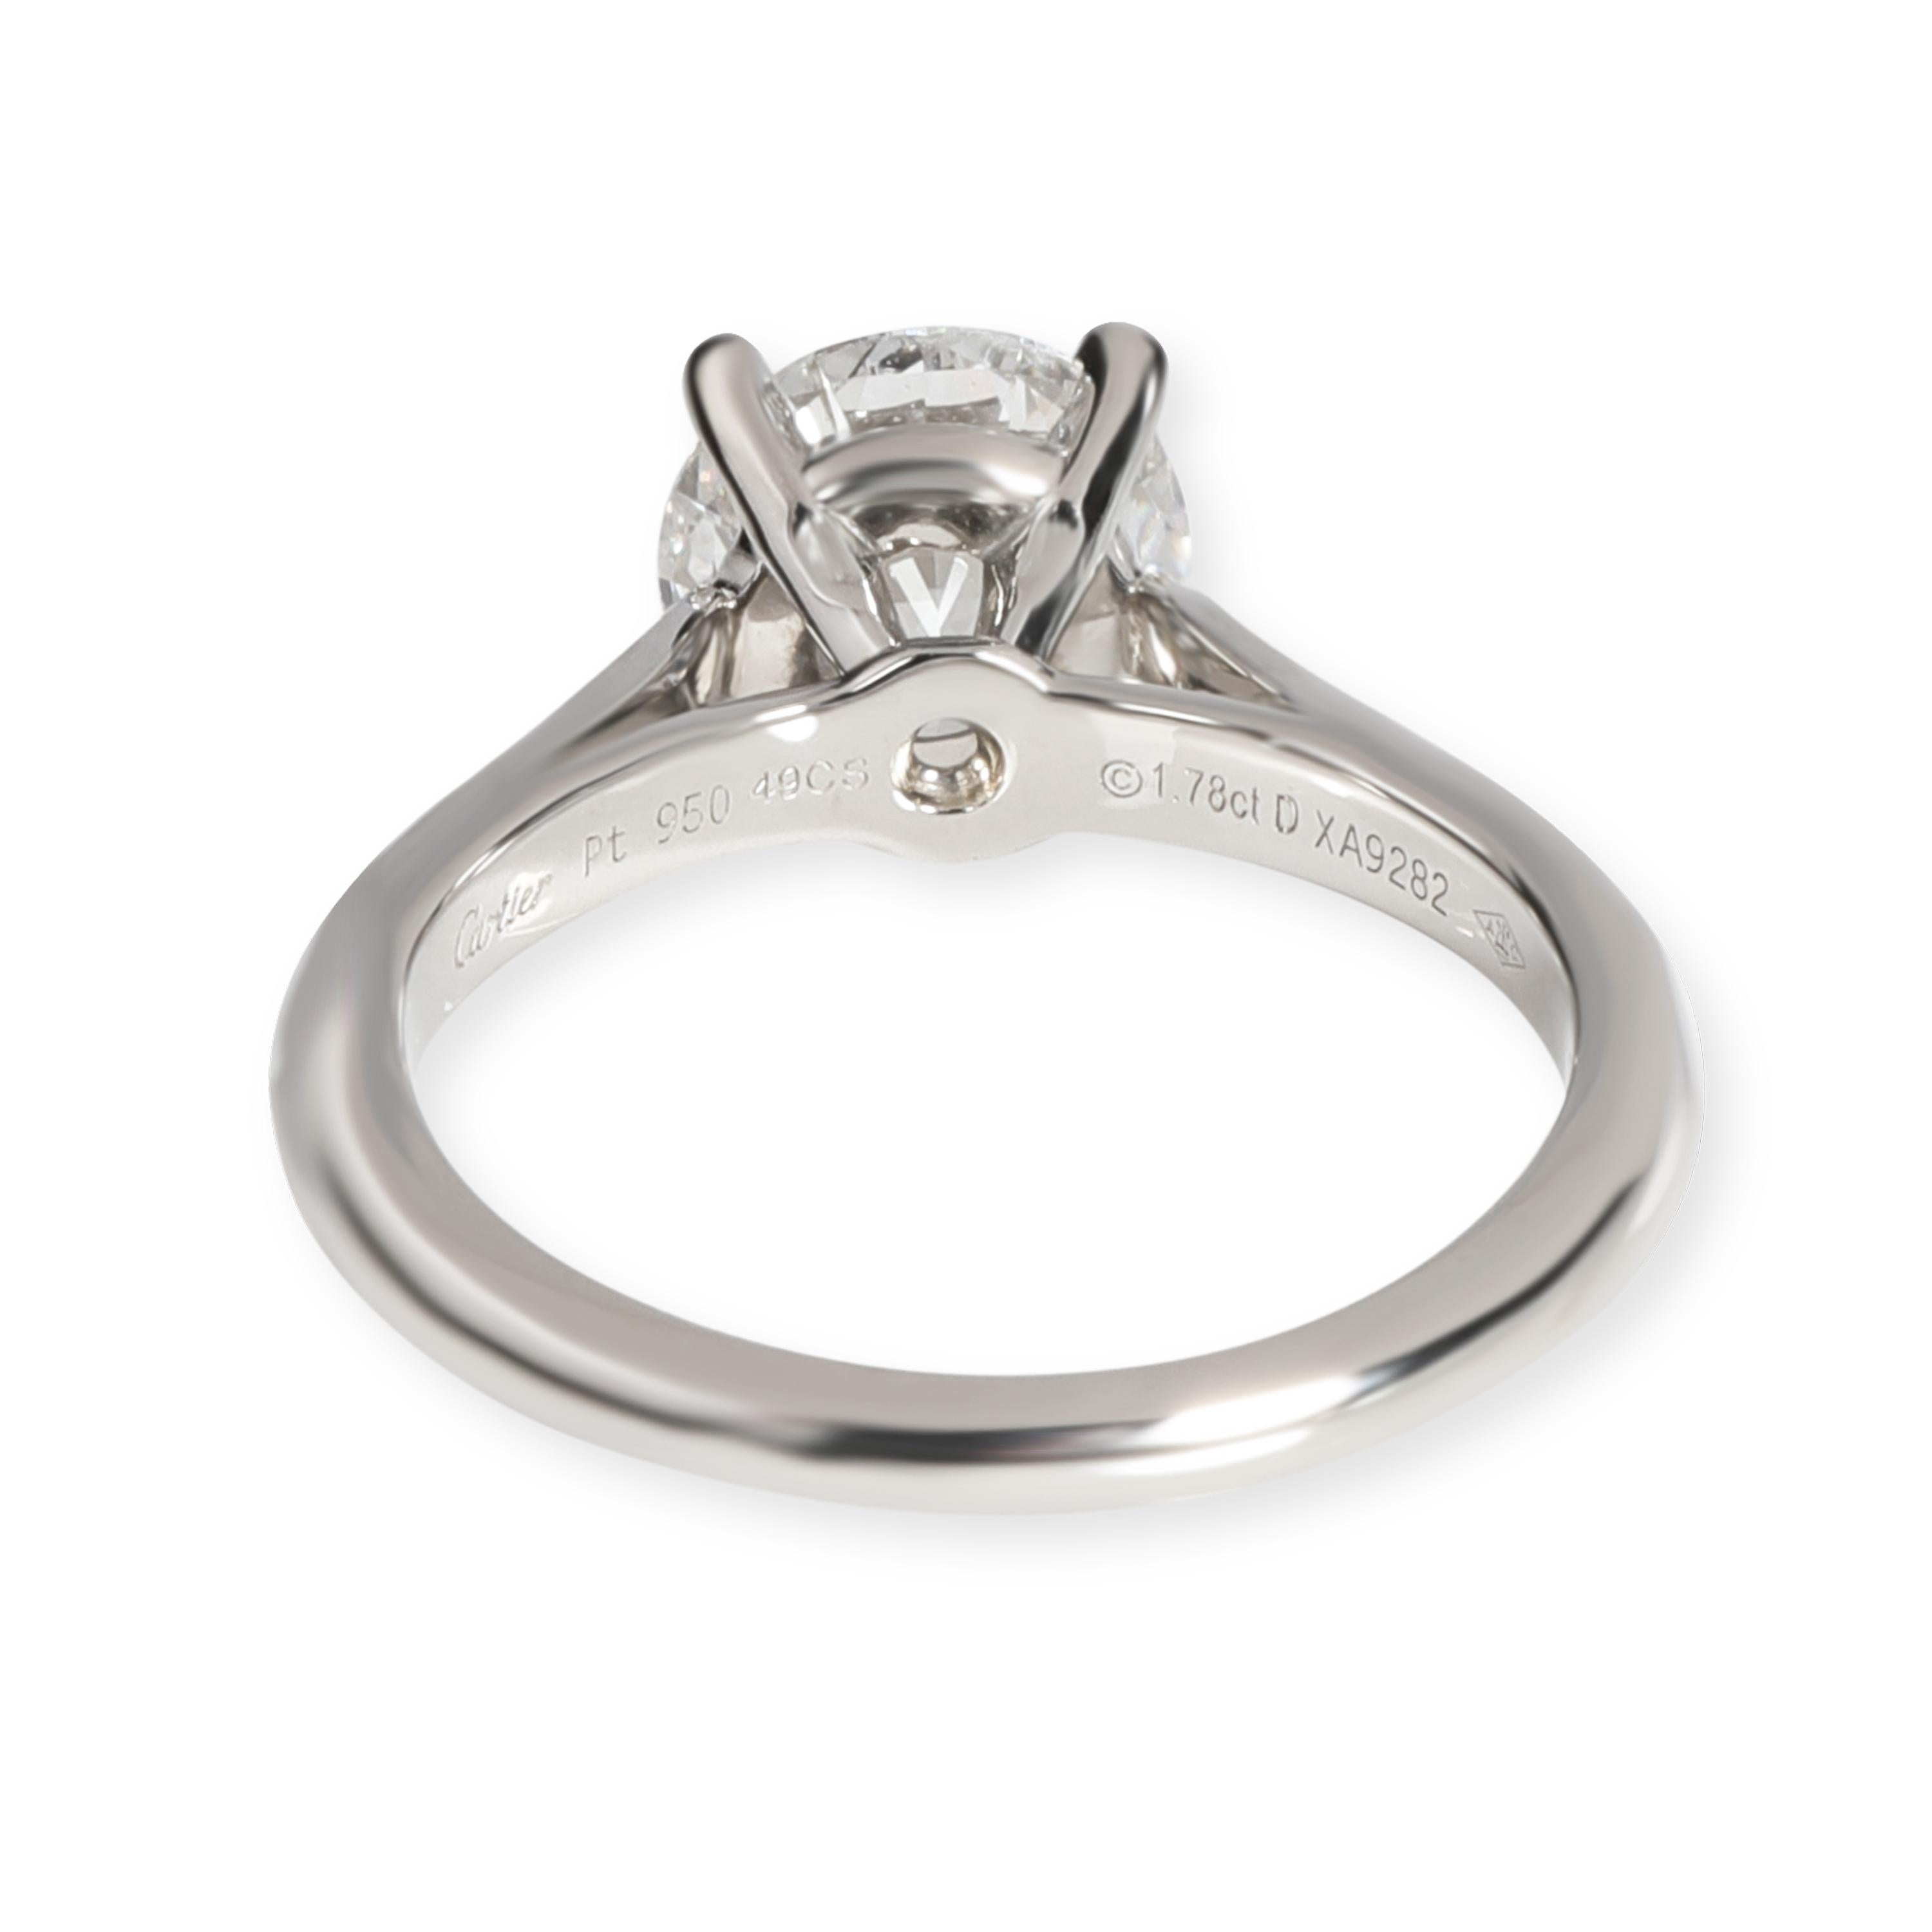 Cartier 1895 Solitaire Diamond Engagement Ring in Platinum E VVS2 1.78 CTW

PRIMARY DETAILS
SKU: 103693
Listing Title: Cartier 1895 Solitaire Diamond Engagement Ring in Platinum E VVS2 1.78 CTW
Condition Description: Retails for 60,400 USD. In